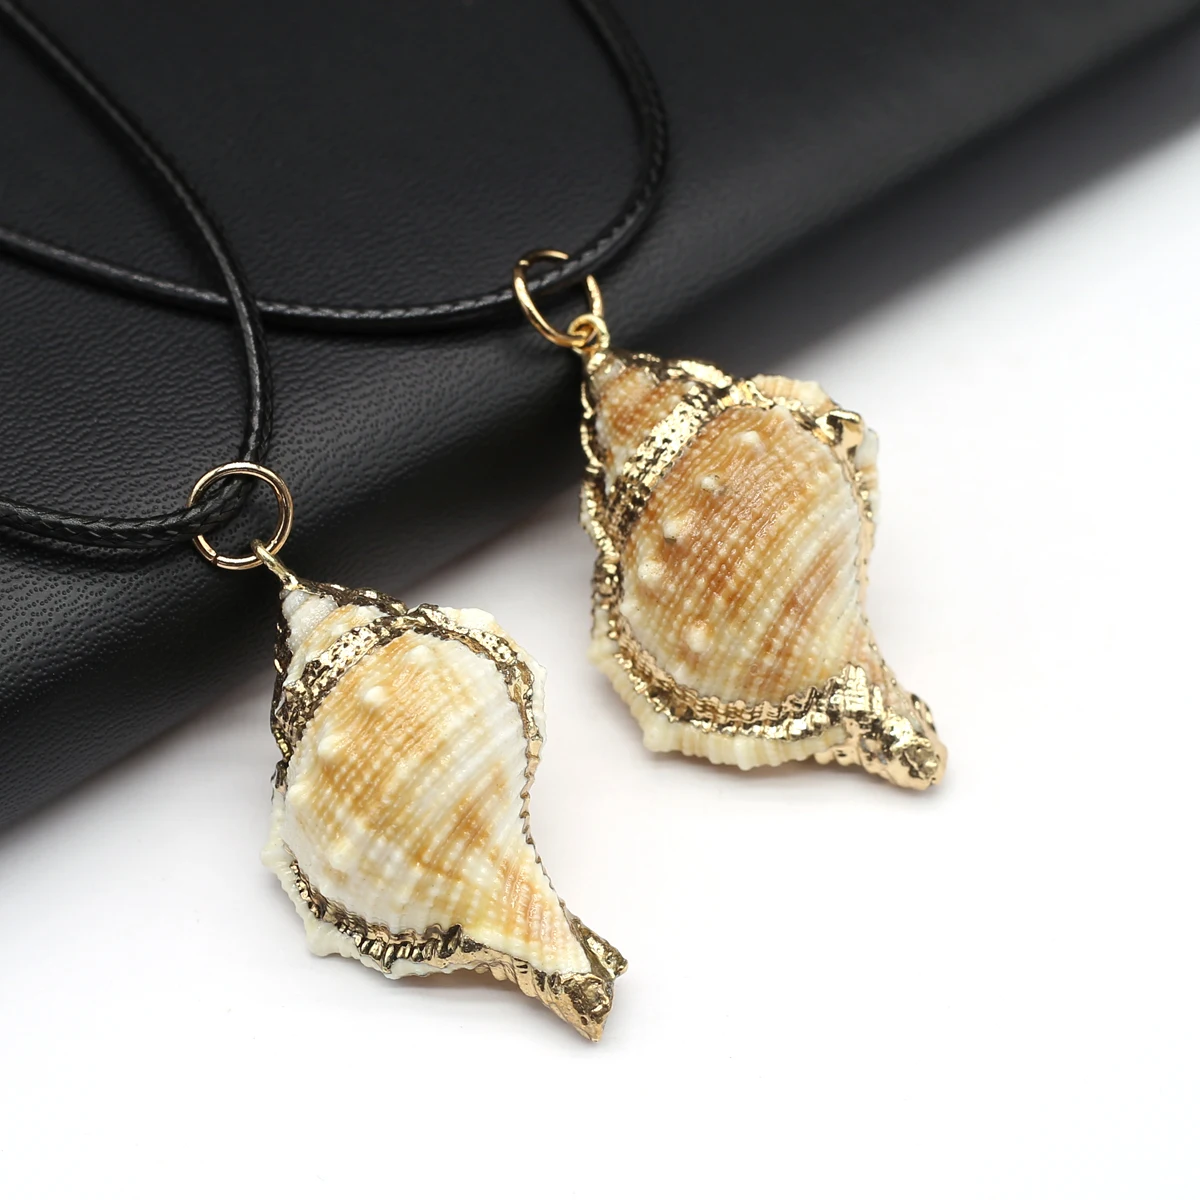 Купи 2Pcs Natural Shell Conch Pendant with Leather Rope Chain Necklaces for Women Jewelry Accessories Wholesale Lots 25x35-30x50mm за 125 рублей в магазине AliExpress